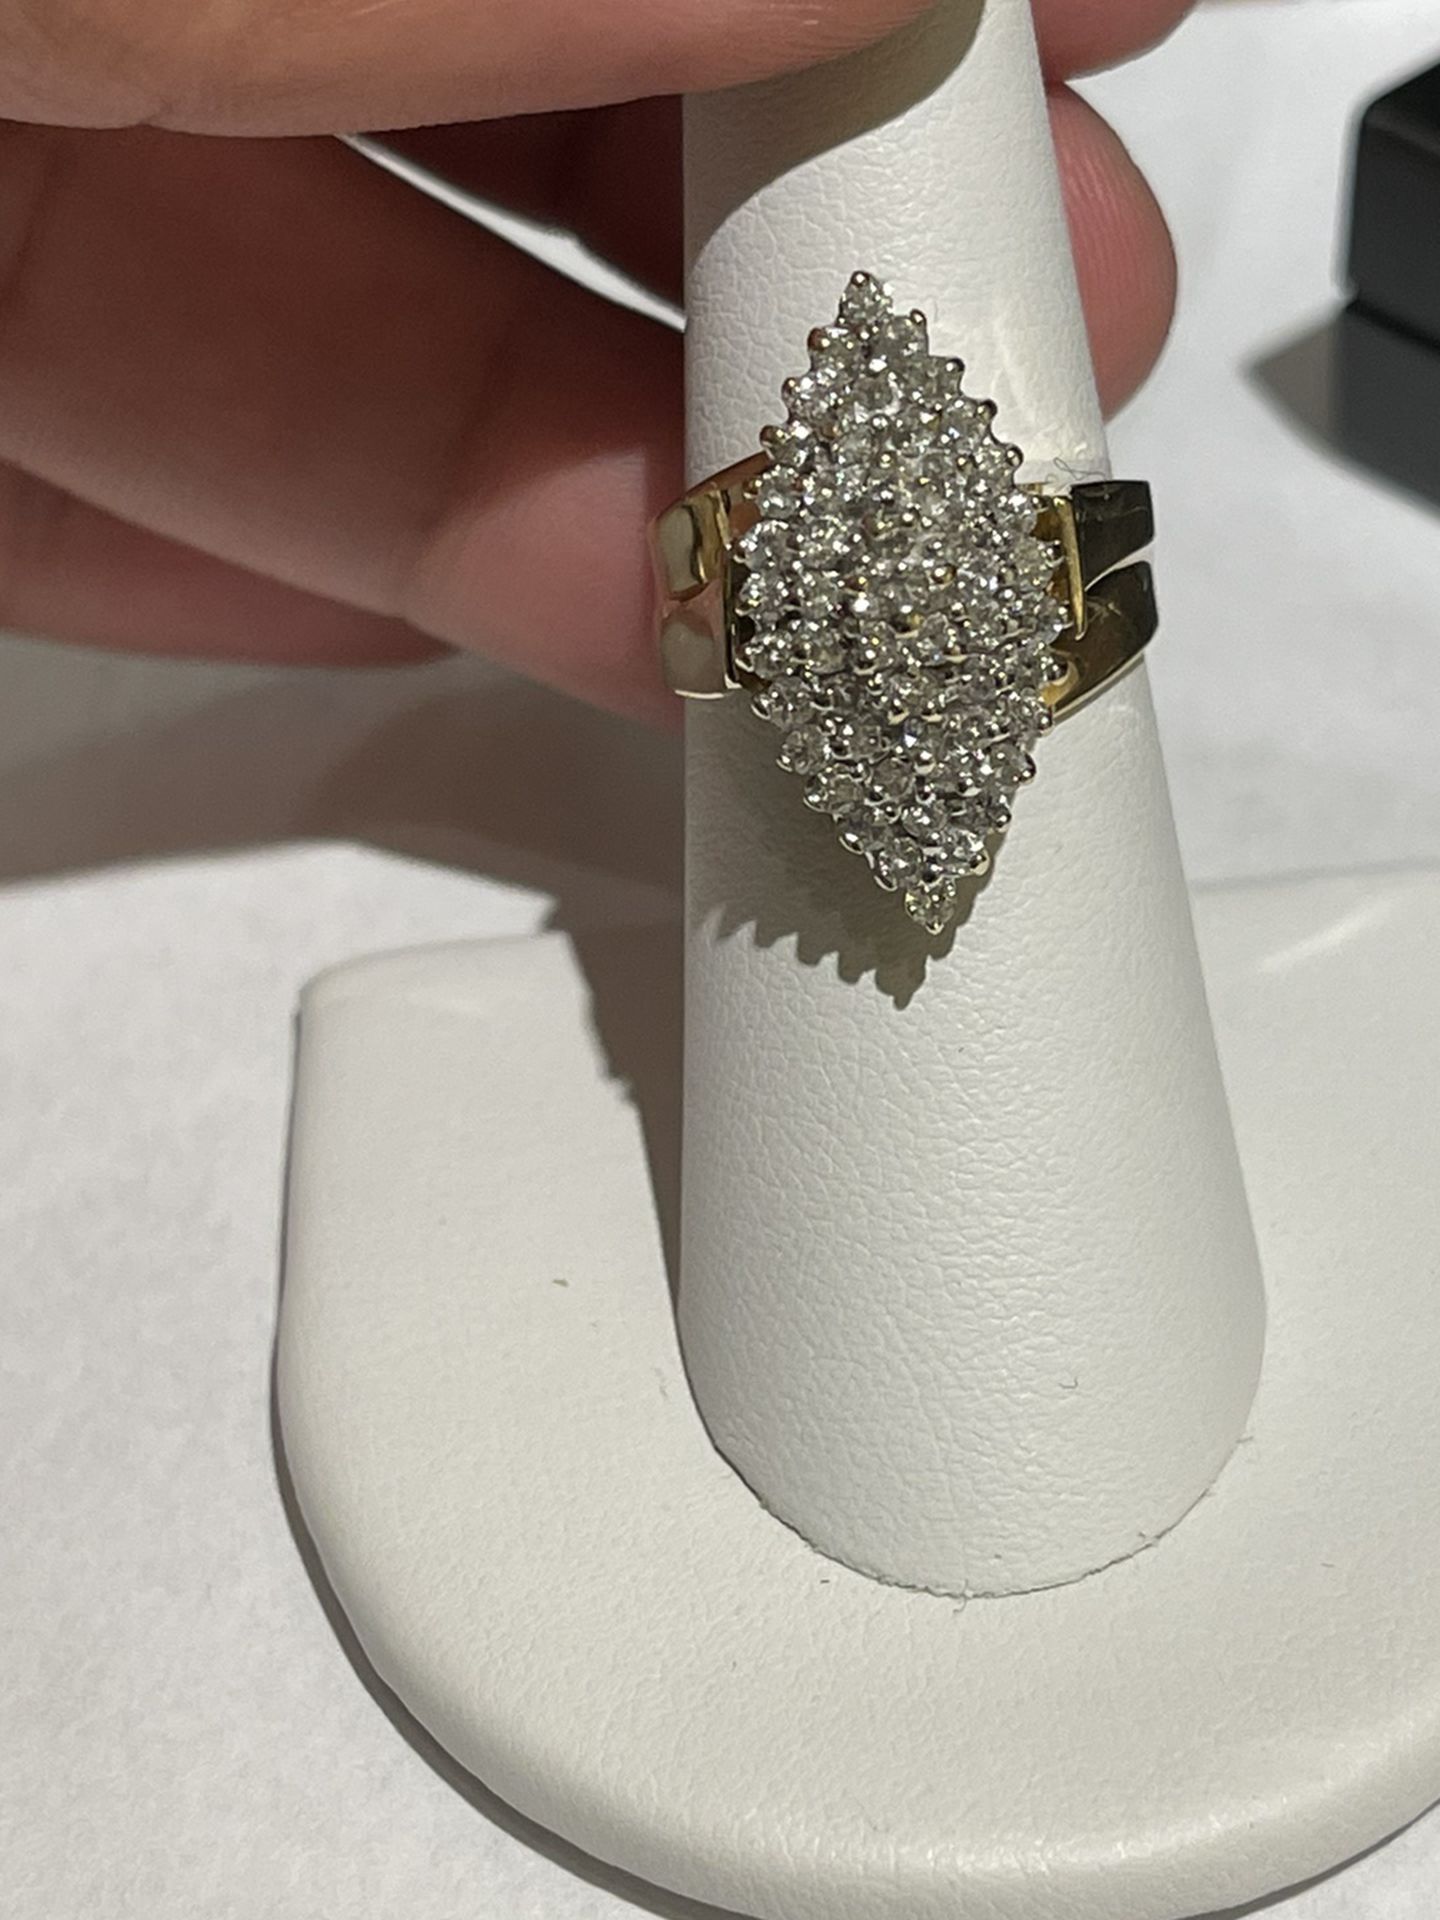 14k gold 1 and 1/2 cut diamond ring size 7